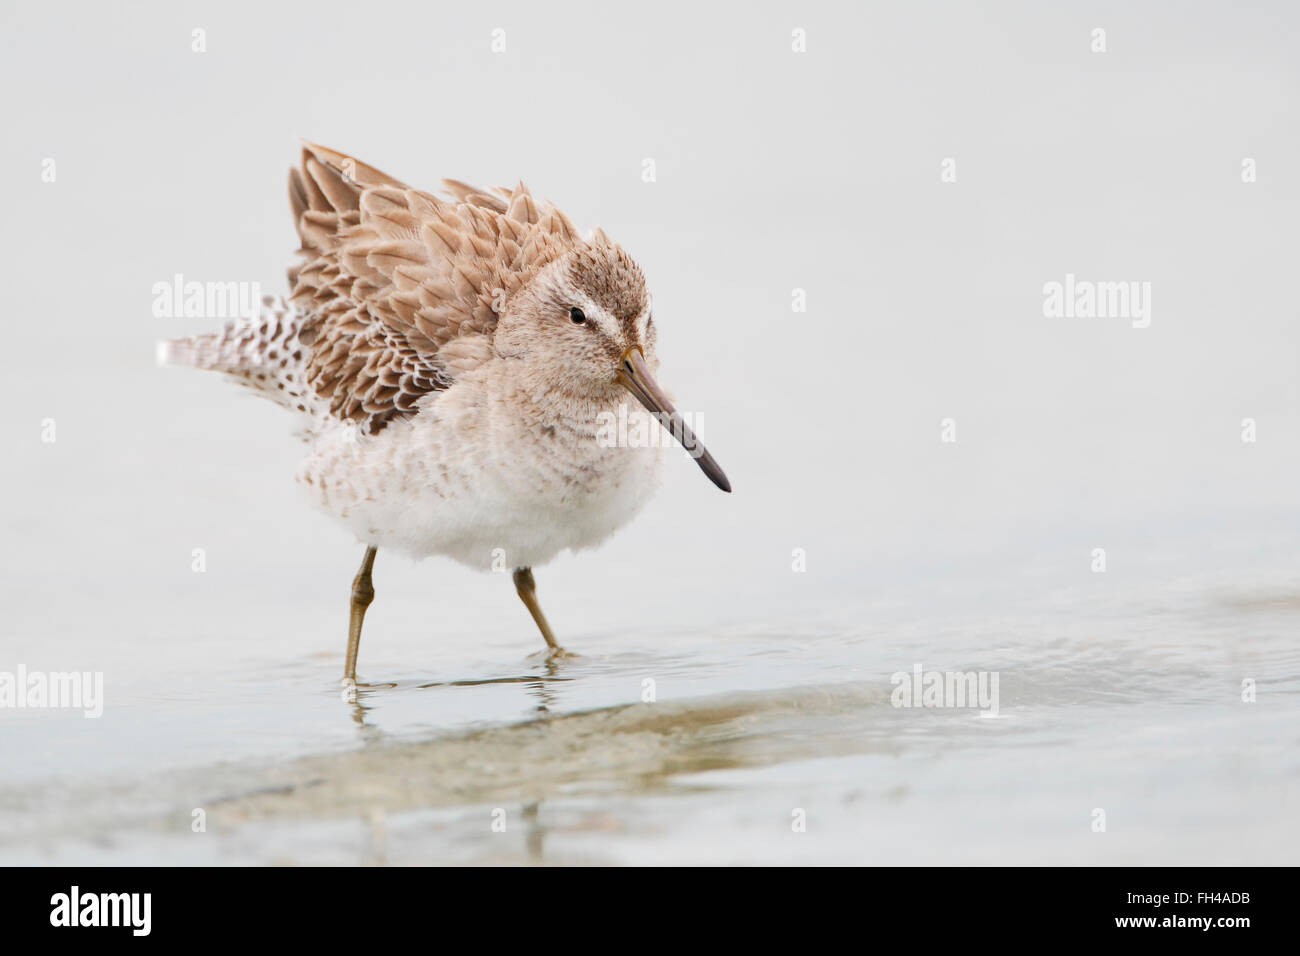 Short-billed Dowitcher (Limnodromus griseus) shaking its feathers while standing in water, Florida, USA Stock Photo